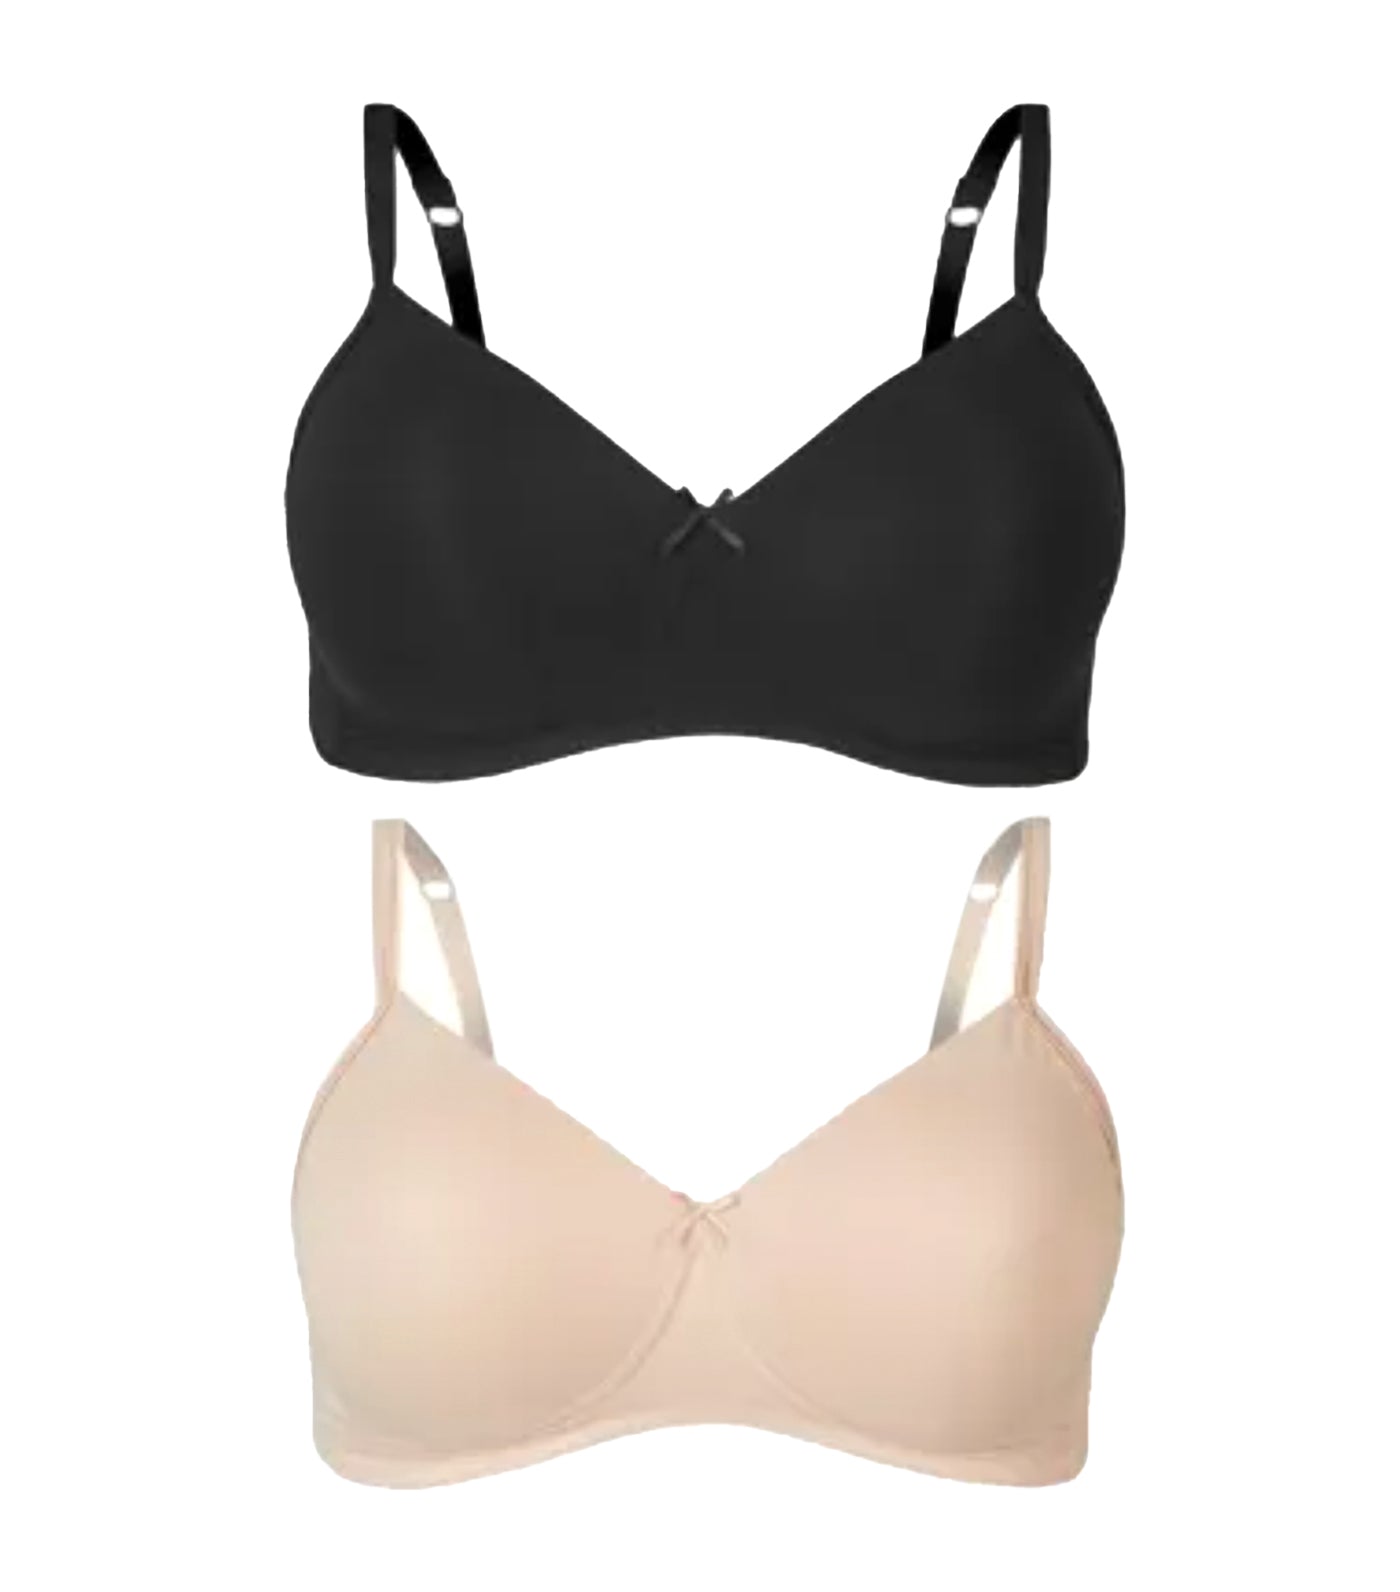 Marks & Spencer 2 Pack Cotton Rich Padded Full Cup Bras - Black